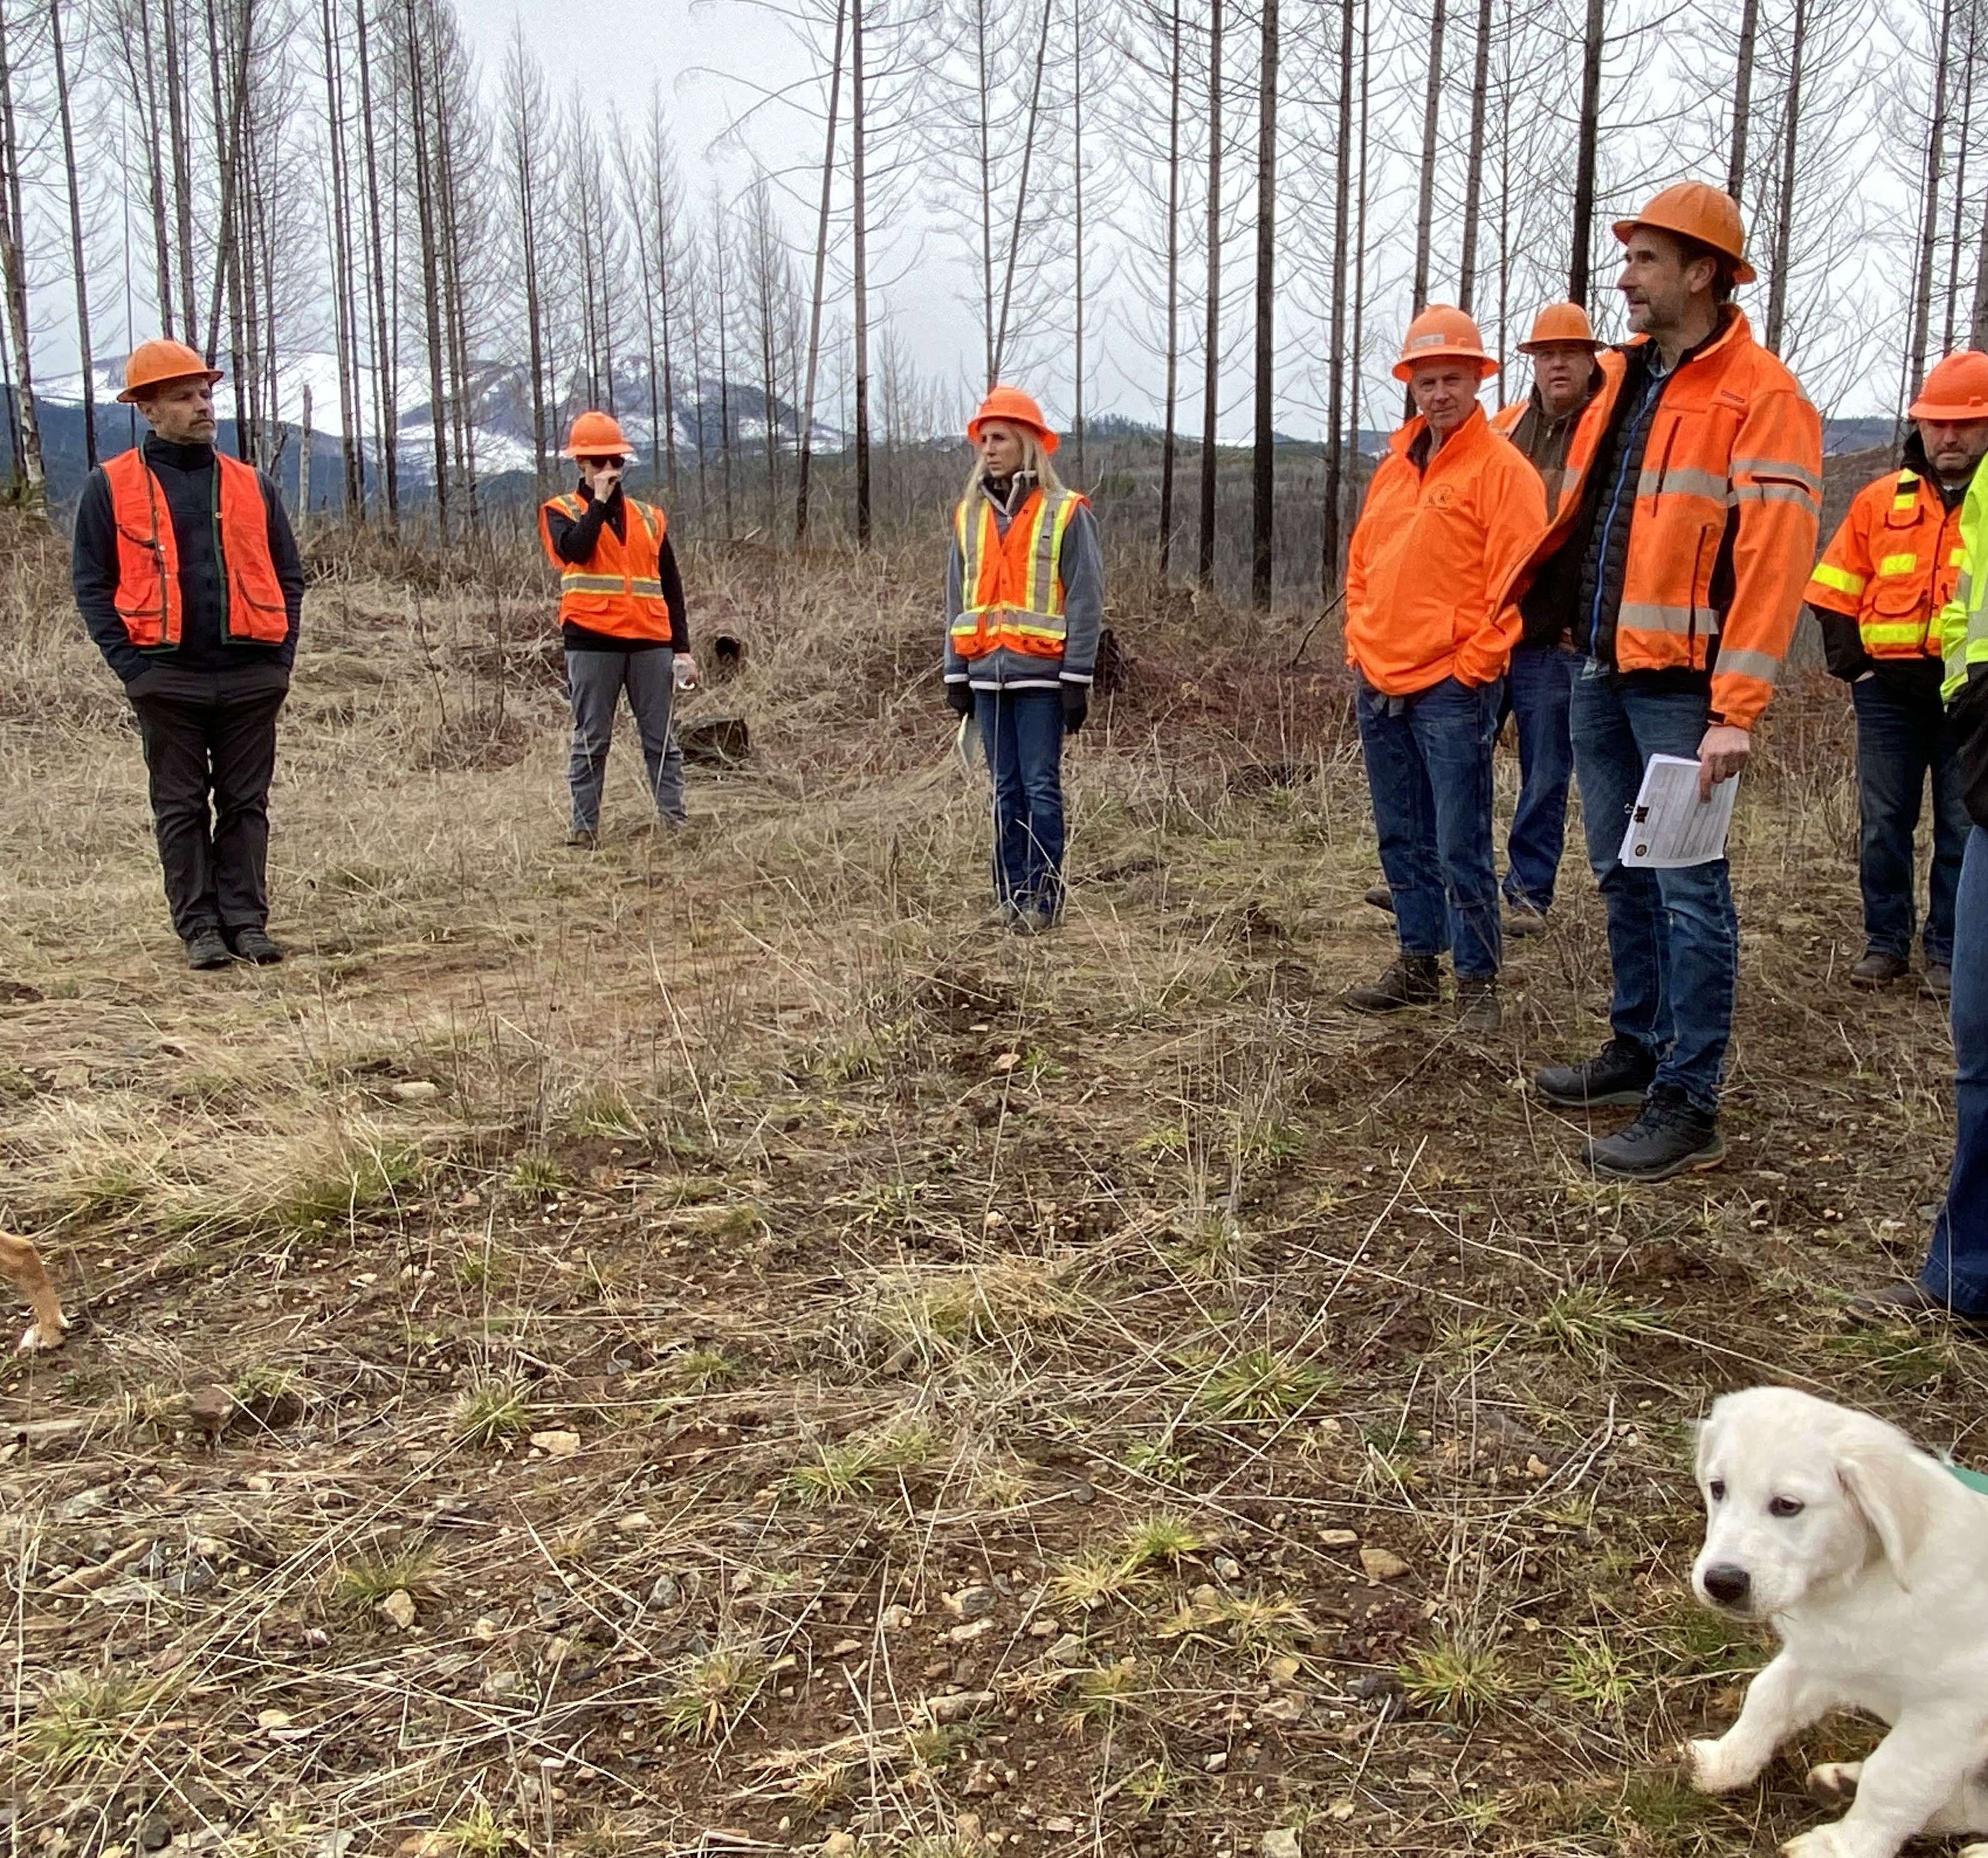 Image of Brad working with Oregon foresters in his role as Sotuh Oregon EMS lead.